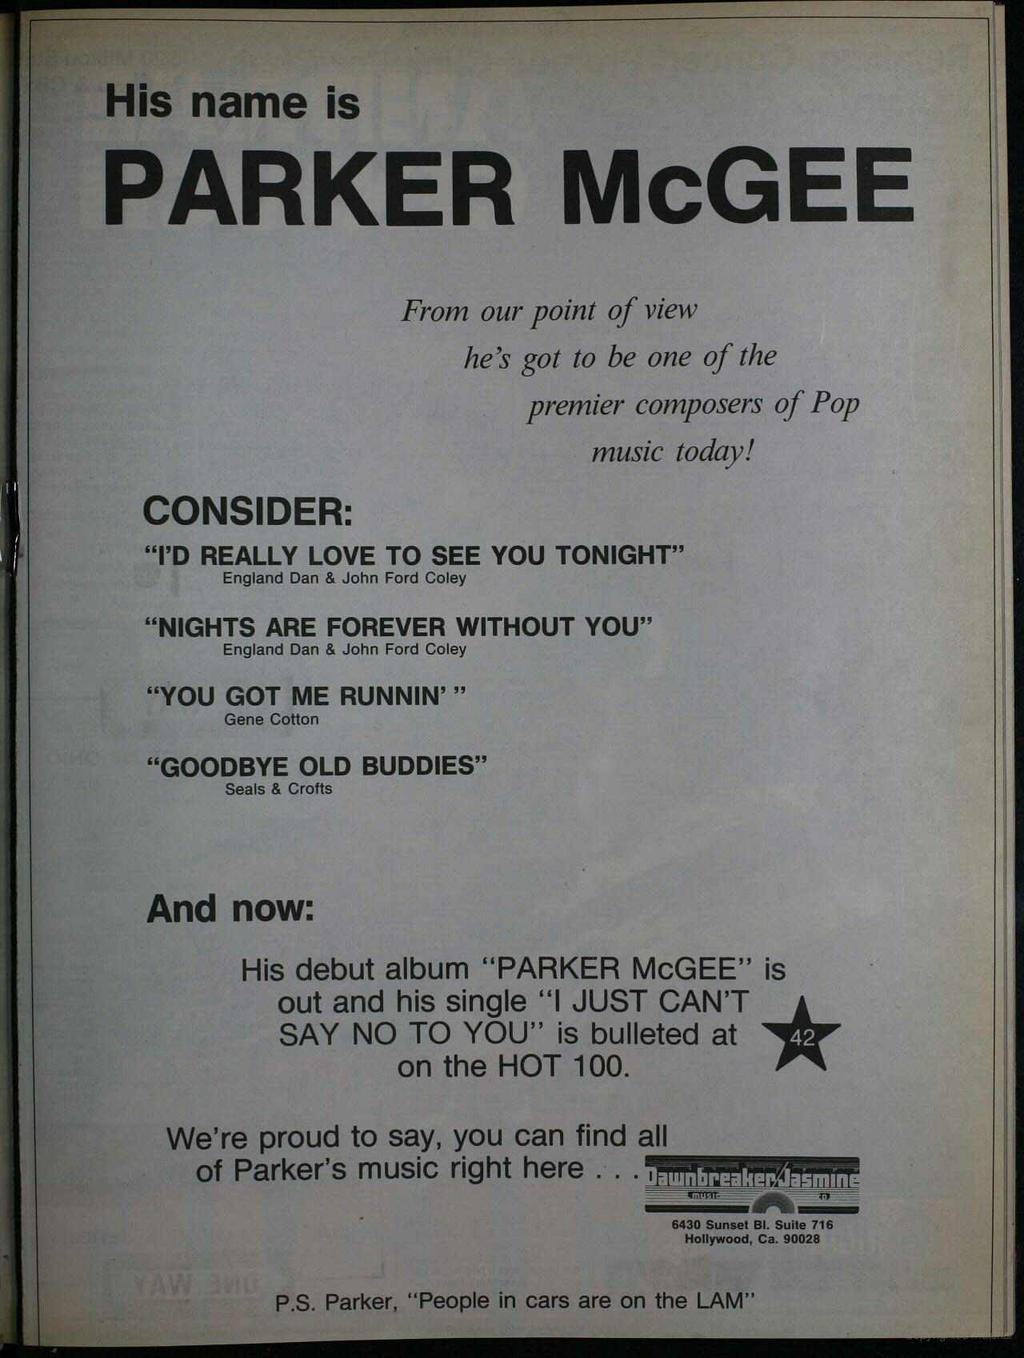 His name is PARKER McGEE CONSDER: From our point of view he's got to be one of the premier composers of Pop music today!